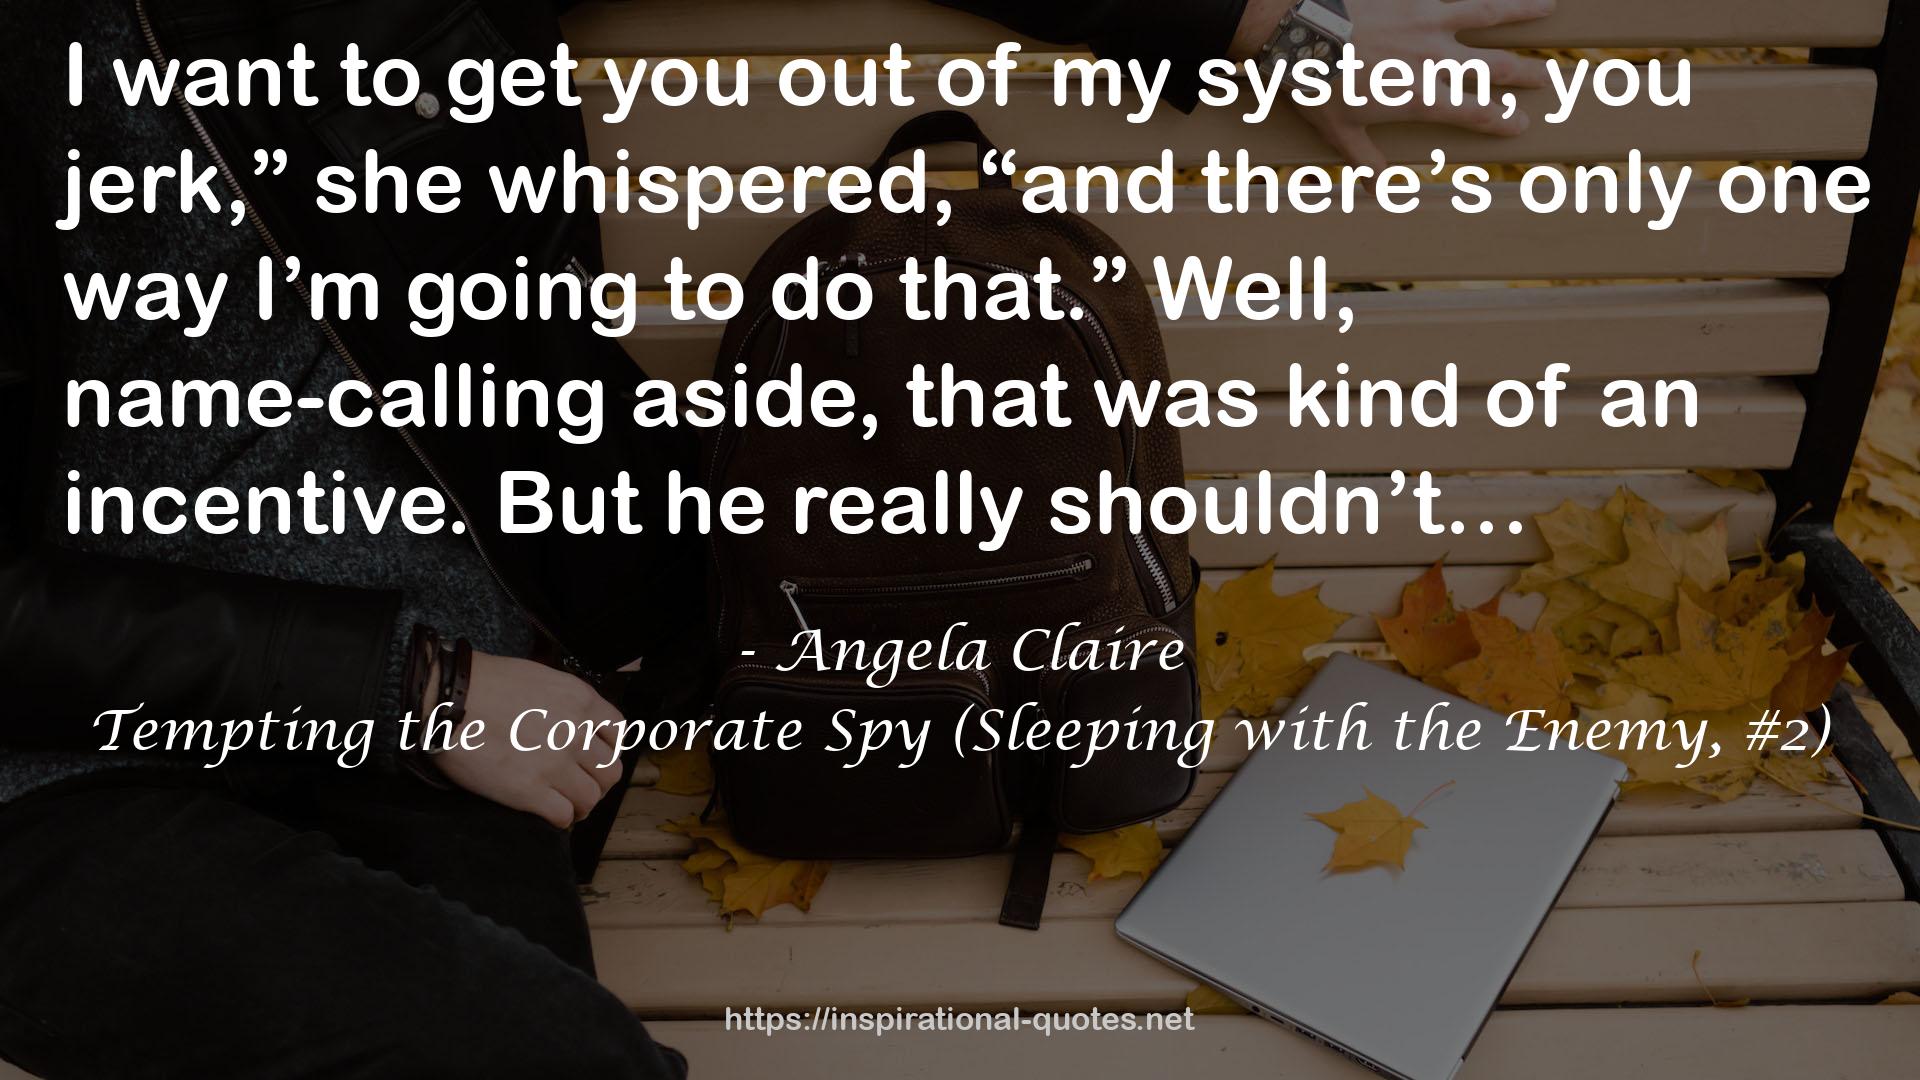 Tempting the Corporate Spy (Sleeping with the Enemy, #2) QUOTES